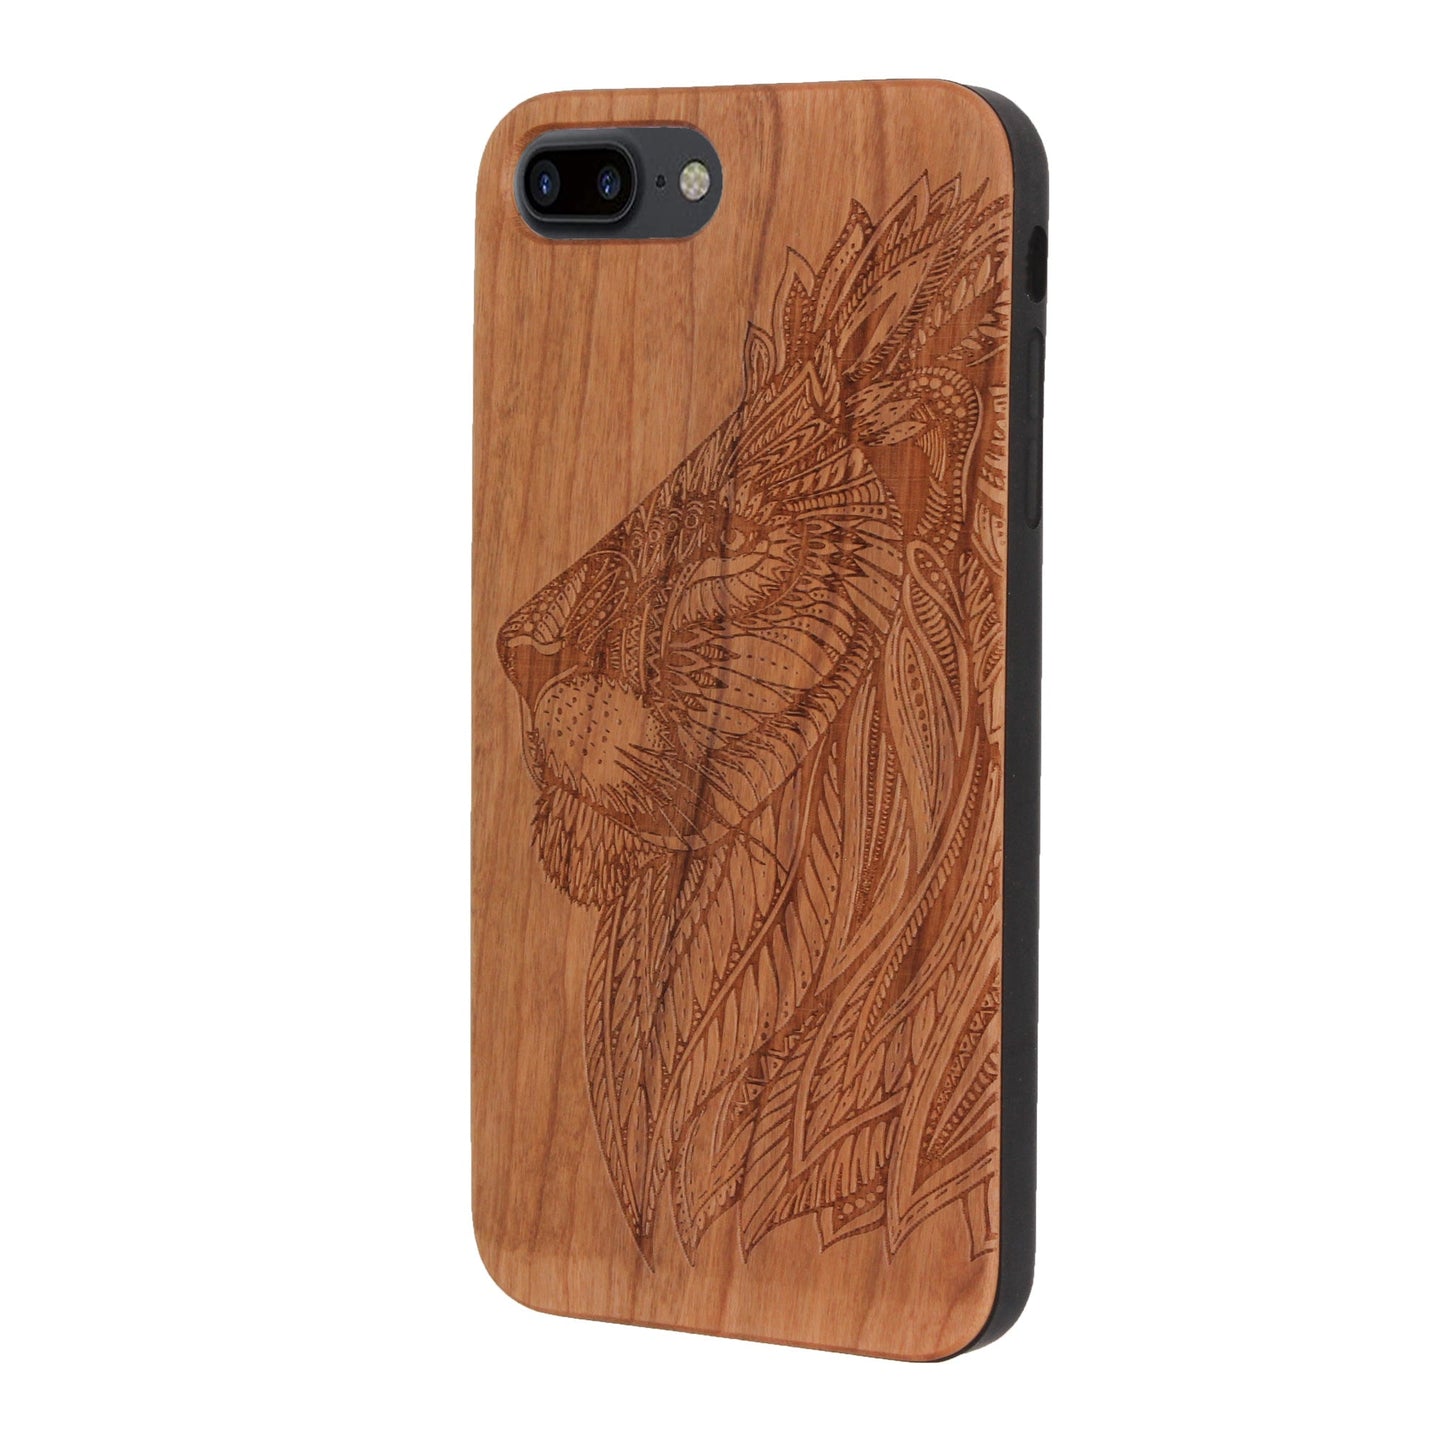 Eden Lion Case made of cherry wood for iPhone 6/6S/7/8 Plus 